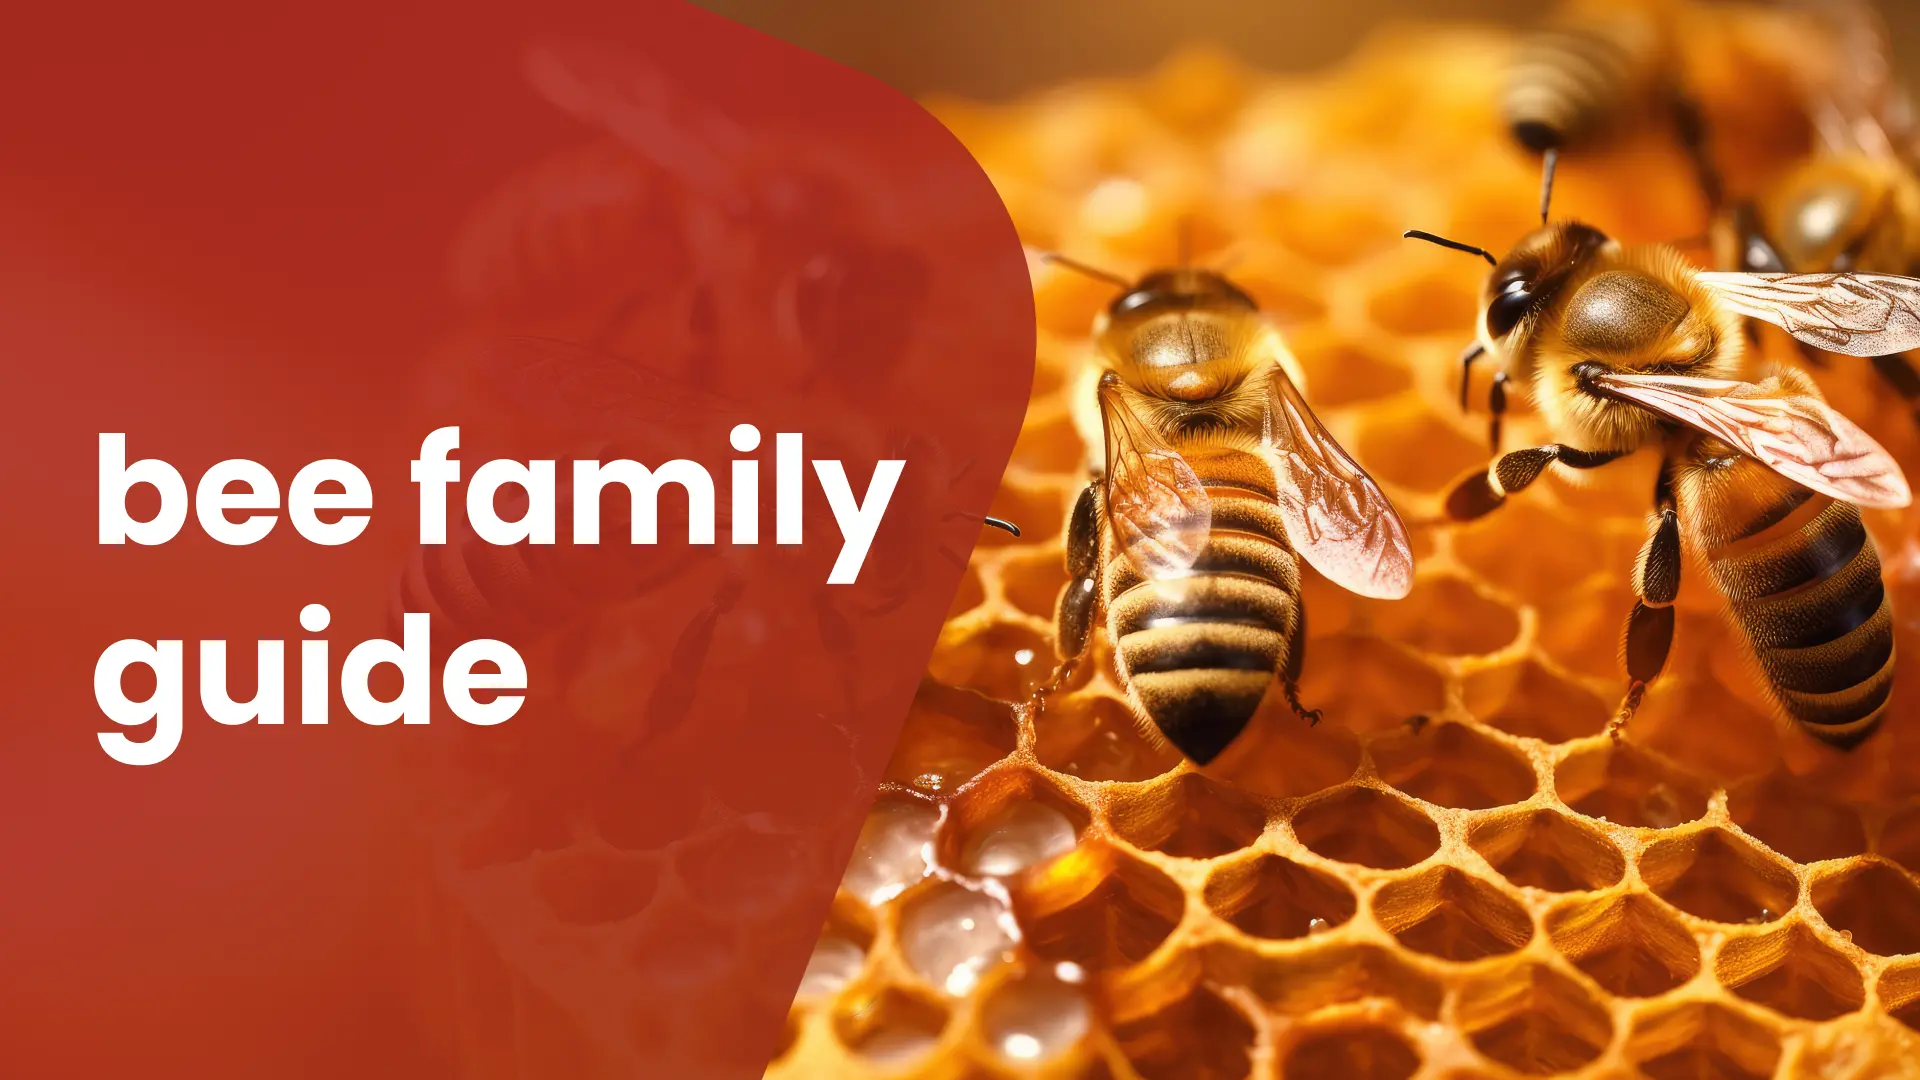 Course Trailer: Practical Guide to Honey Bee Family Separation & Management. Watch to know more.